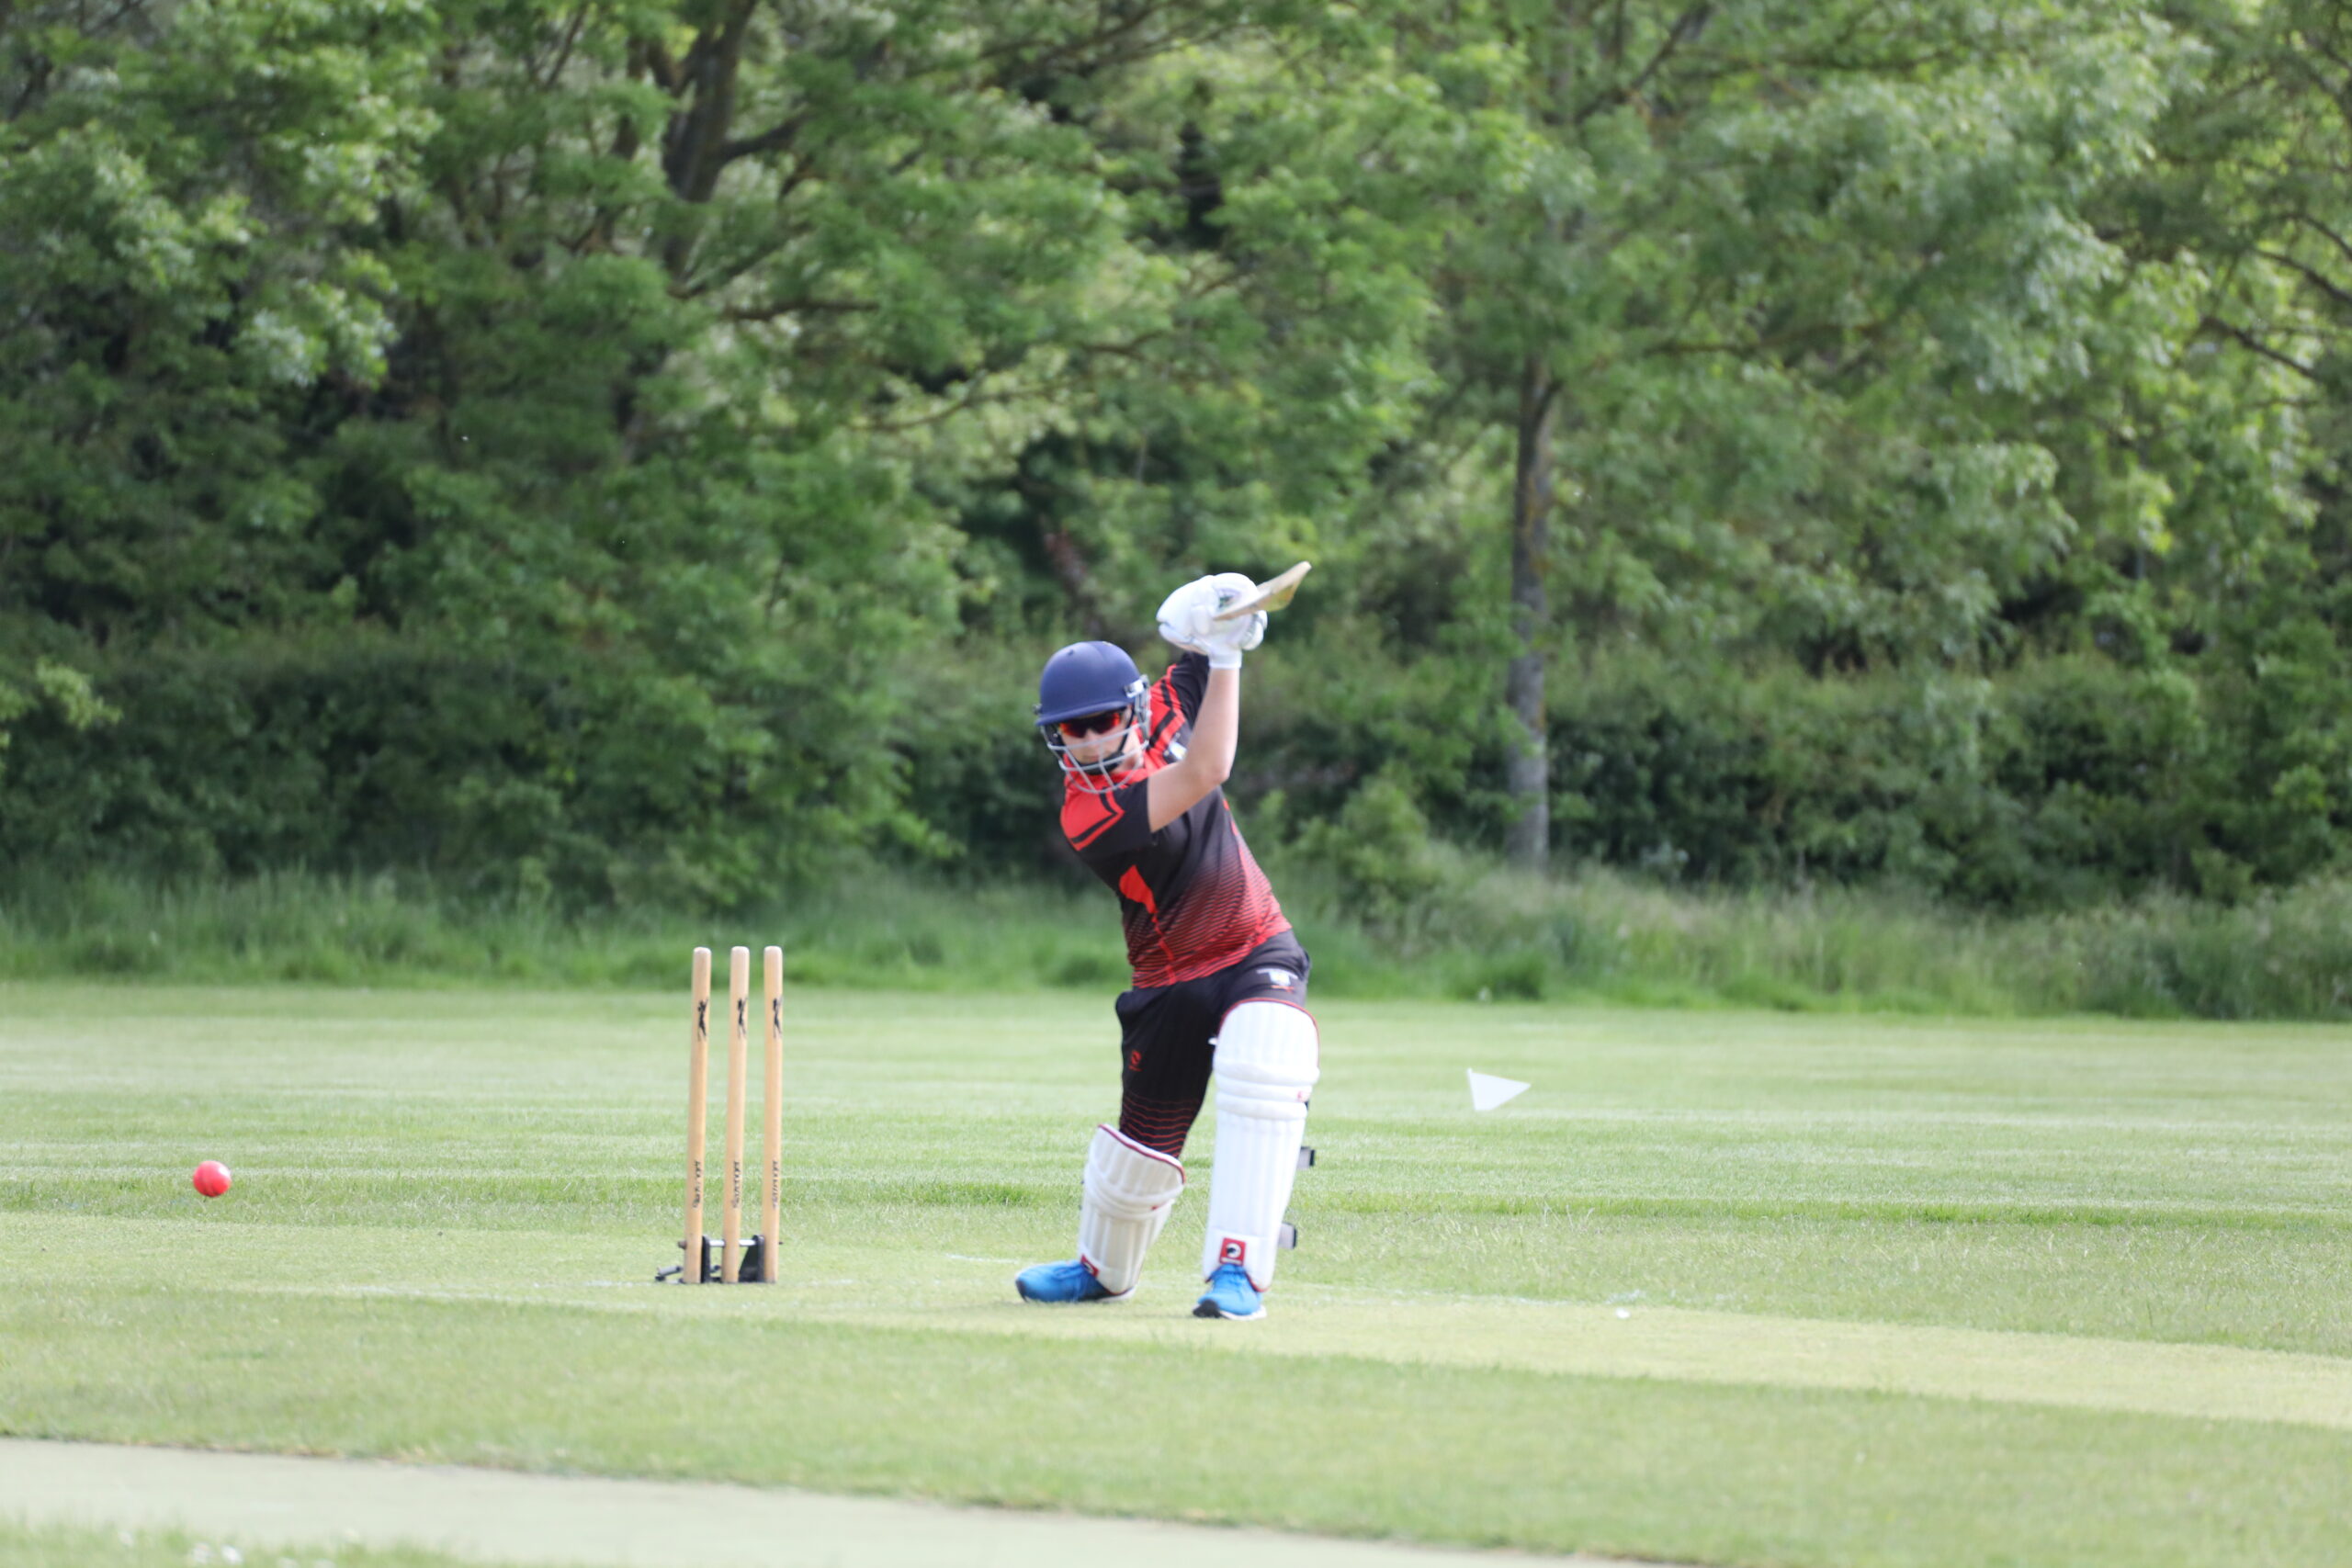 Josh Hatcher of Guildford City Cricket Youth Project playing a cover drive